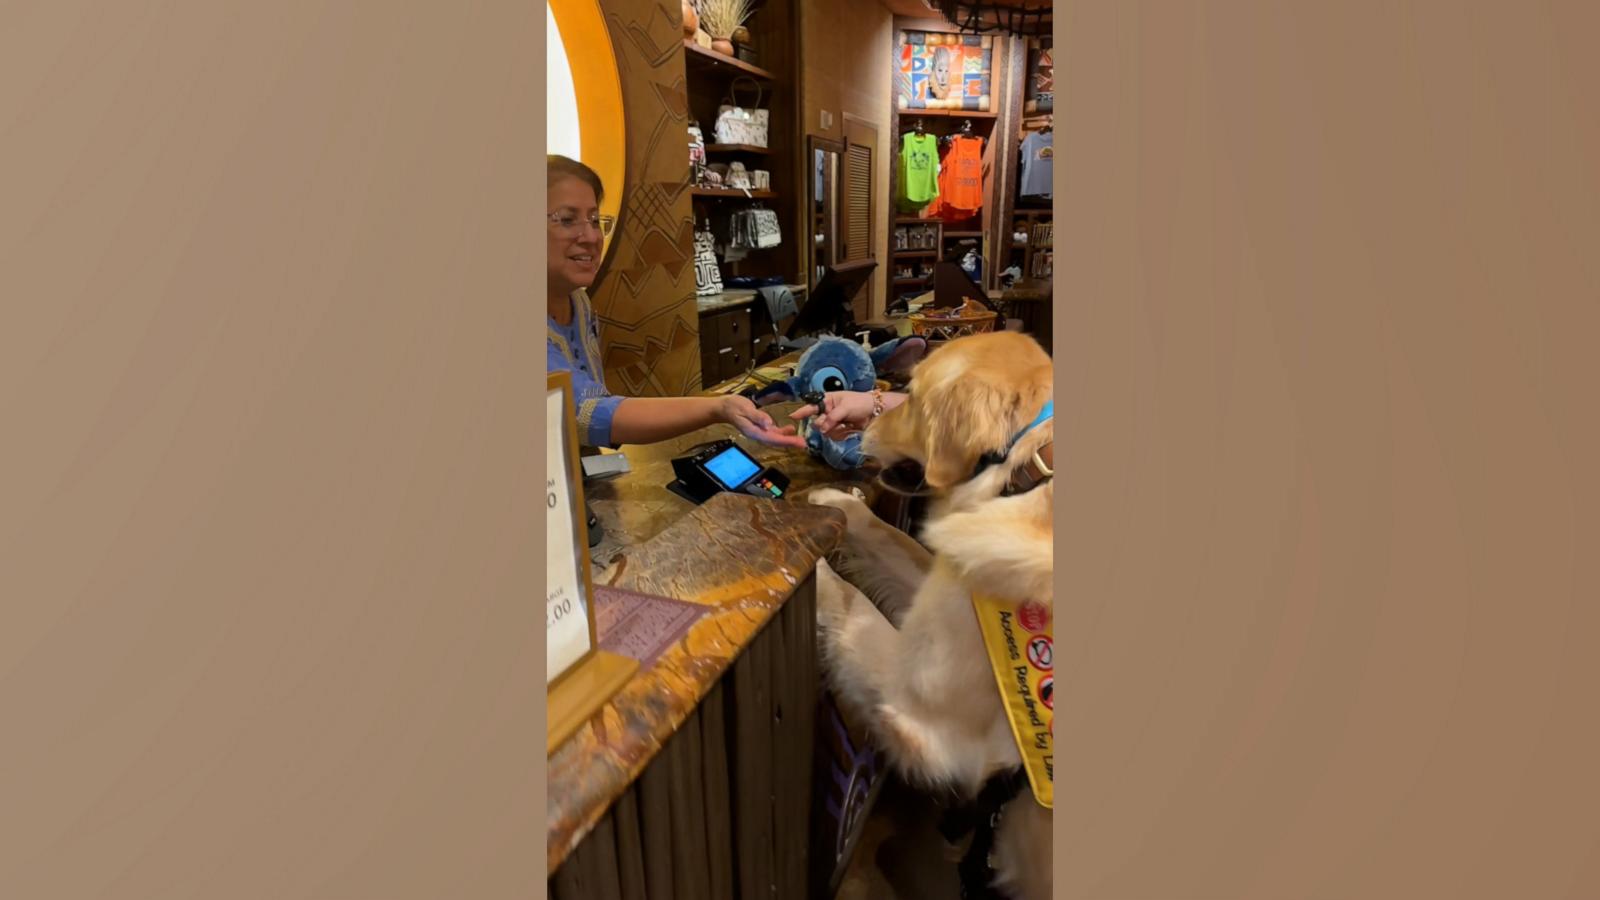 VIDEO: Service dog picks out his own toy and pays for it